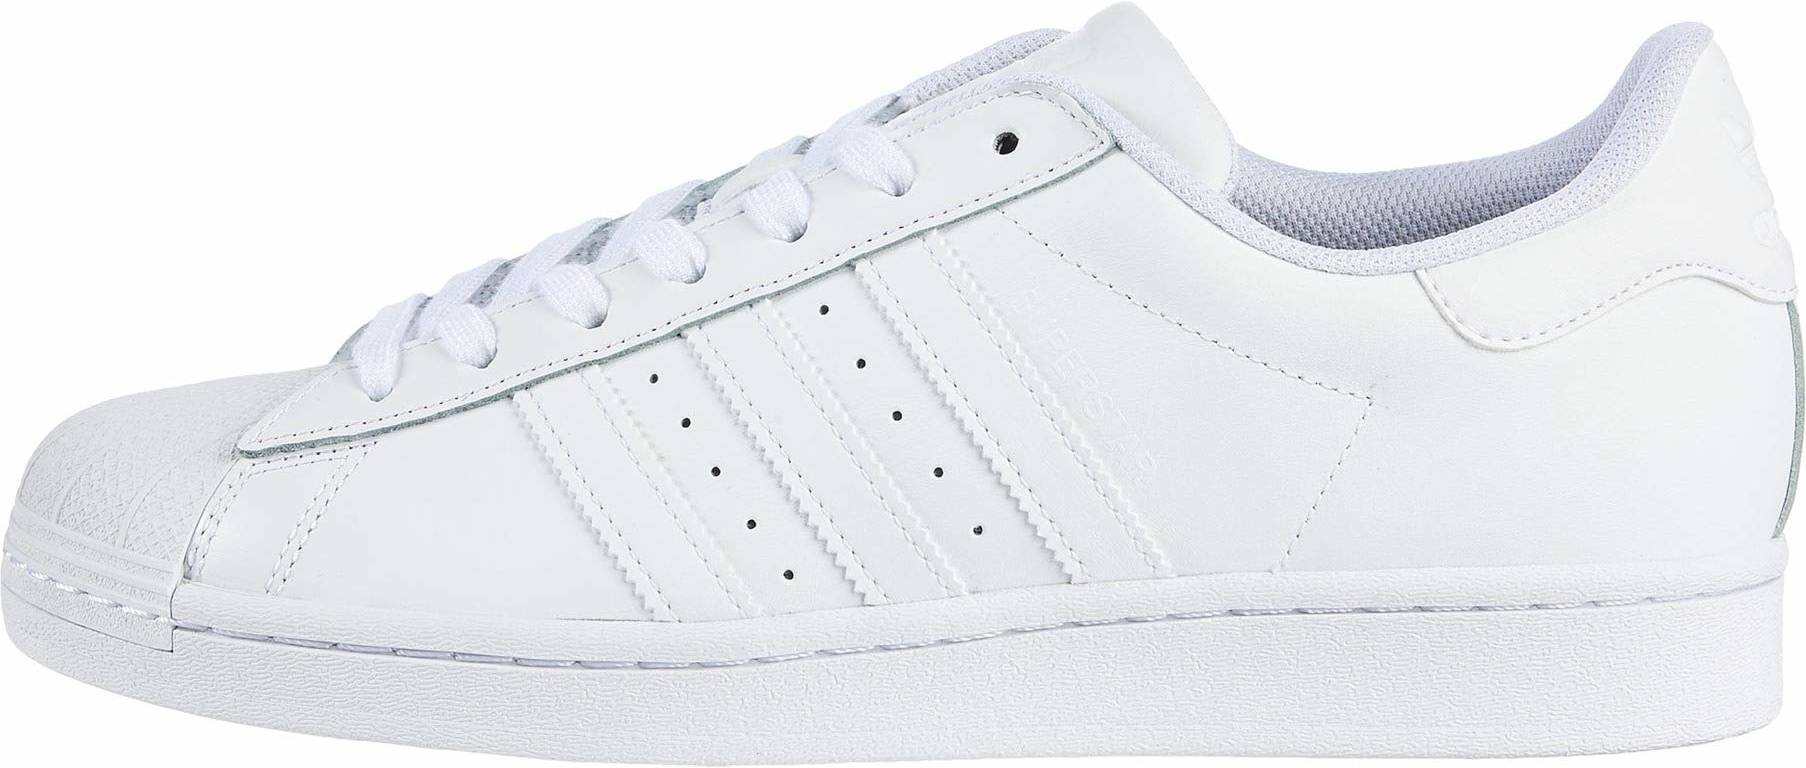 Only £31 + Review of Adidas Superstar 